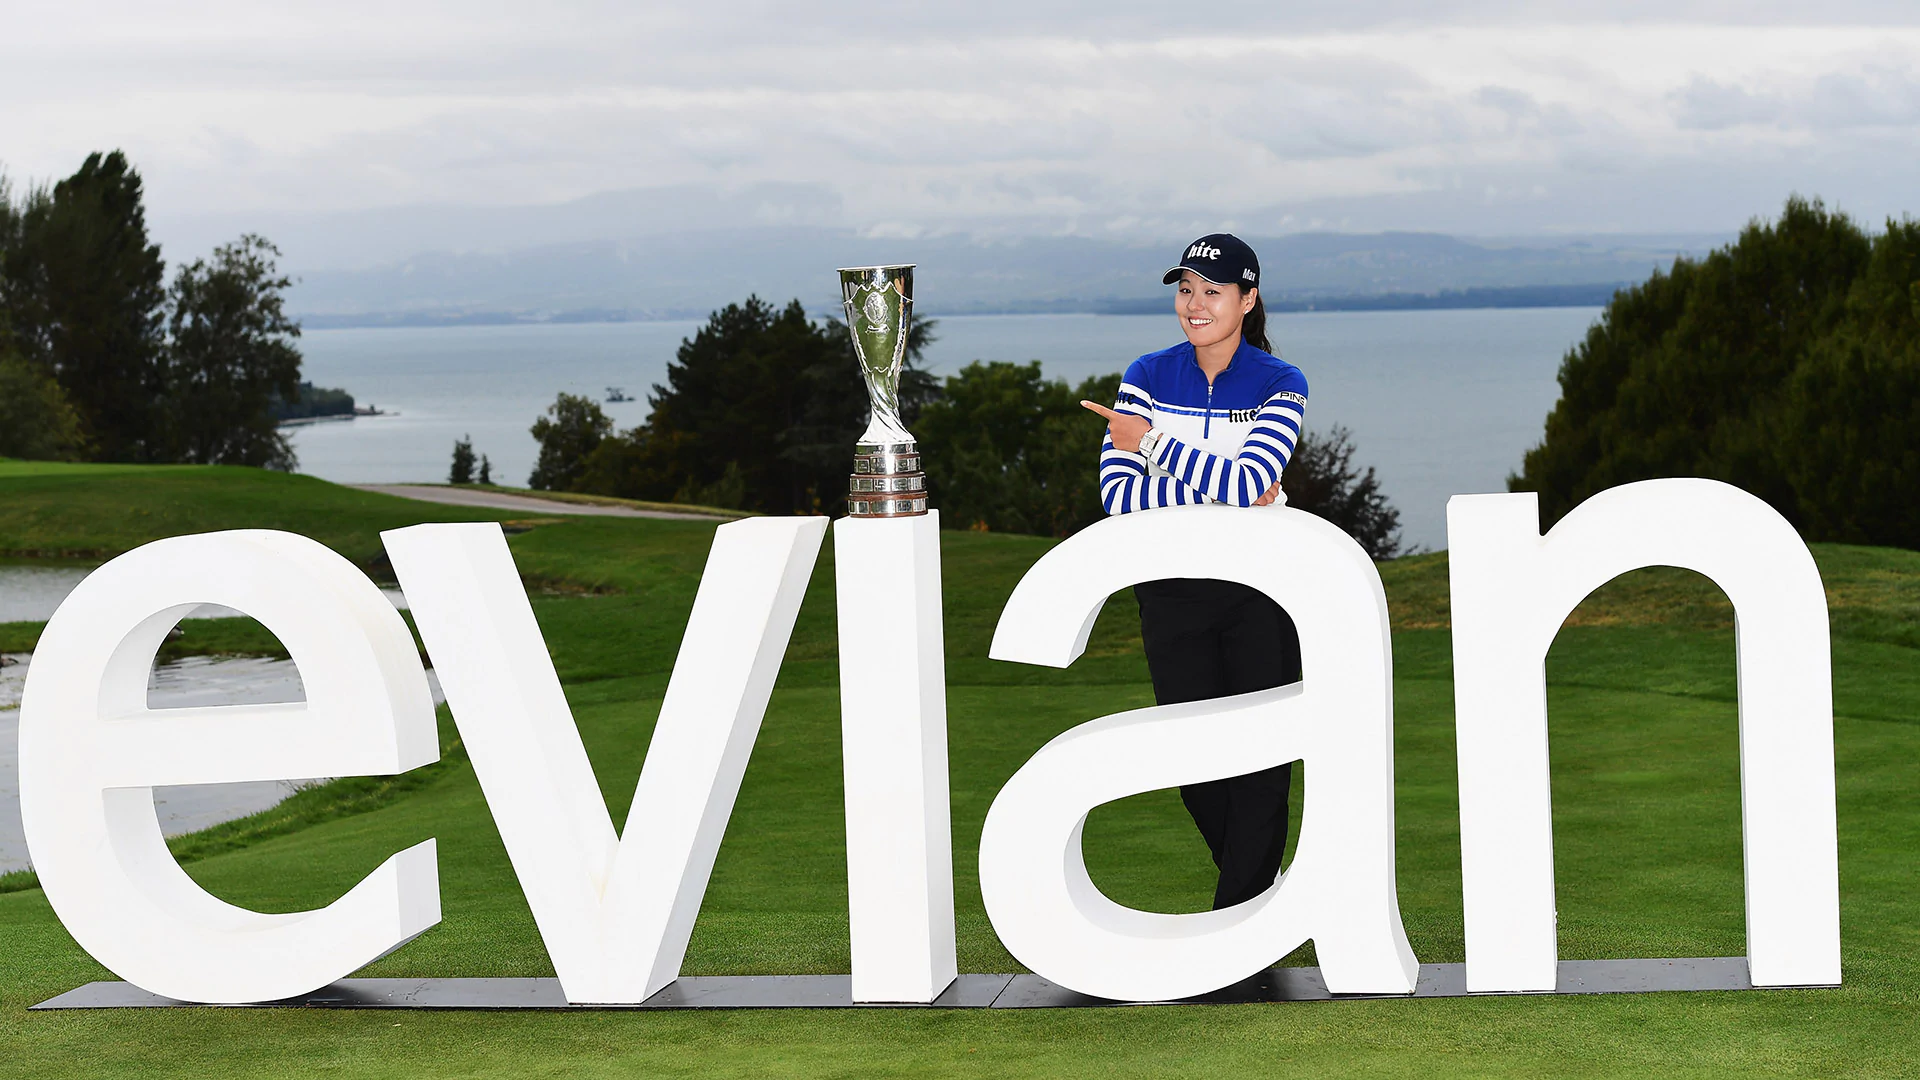 Evian purse increase ($3.65 mil) makes it LPGA's 2nd largest 7